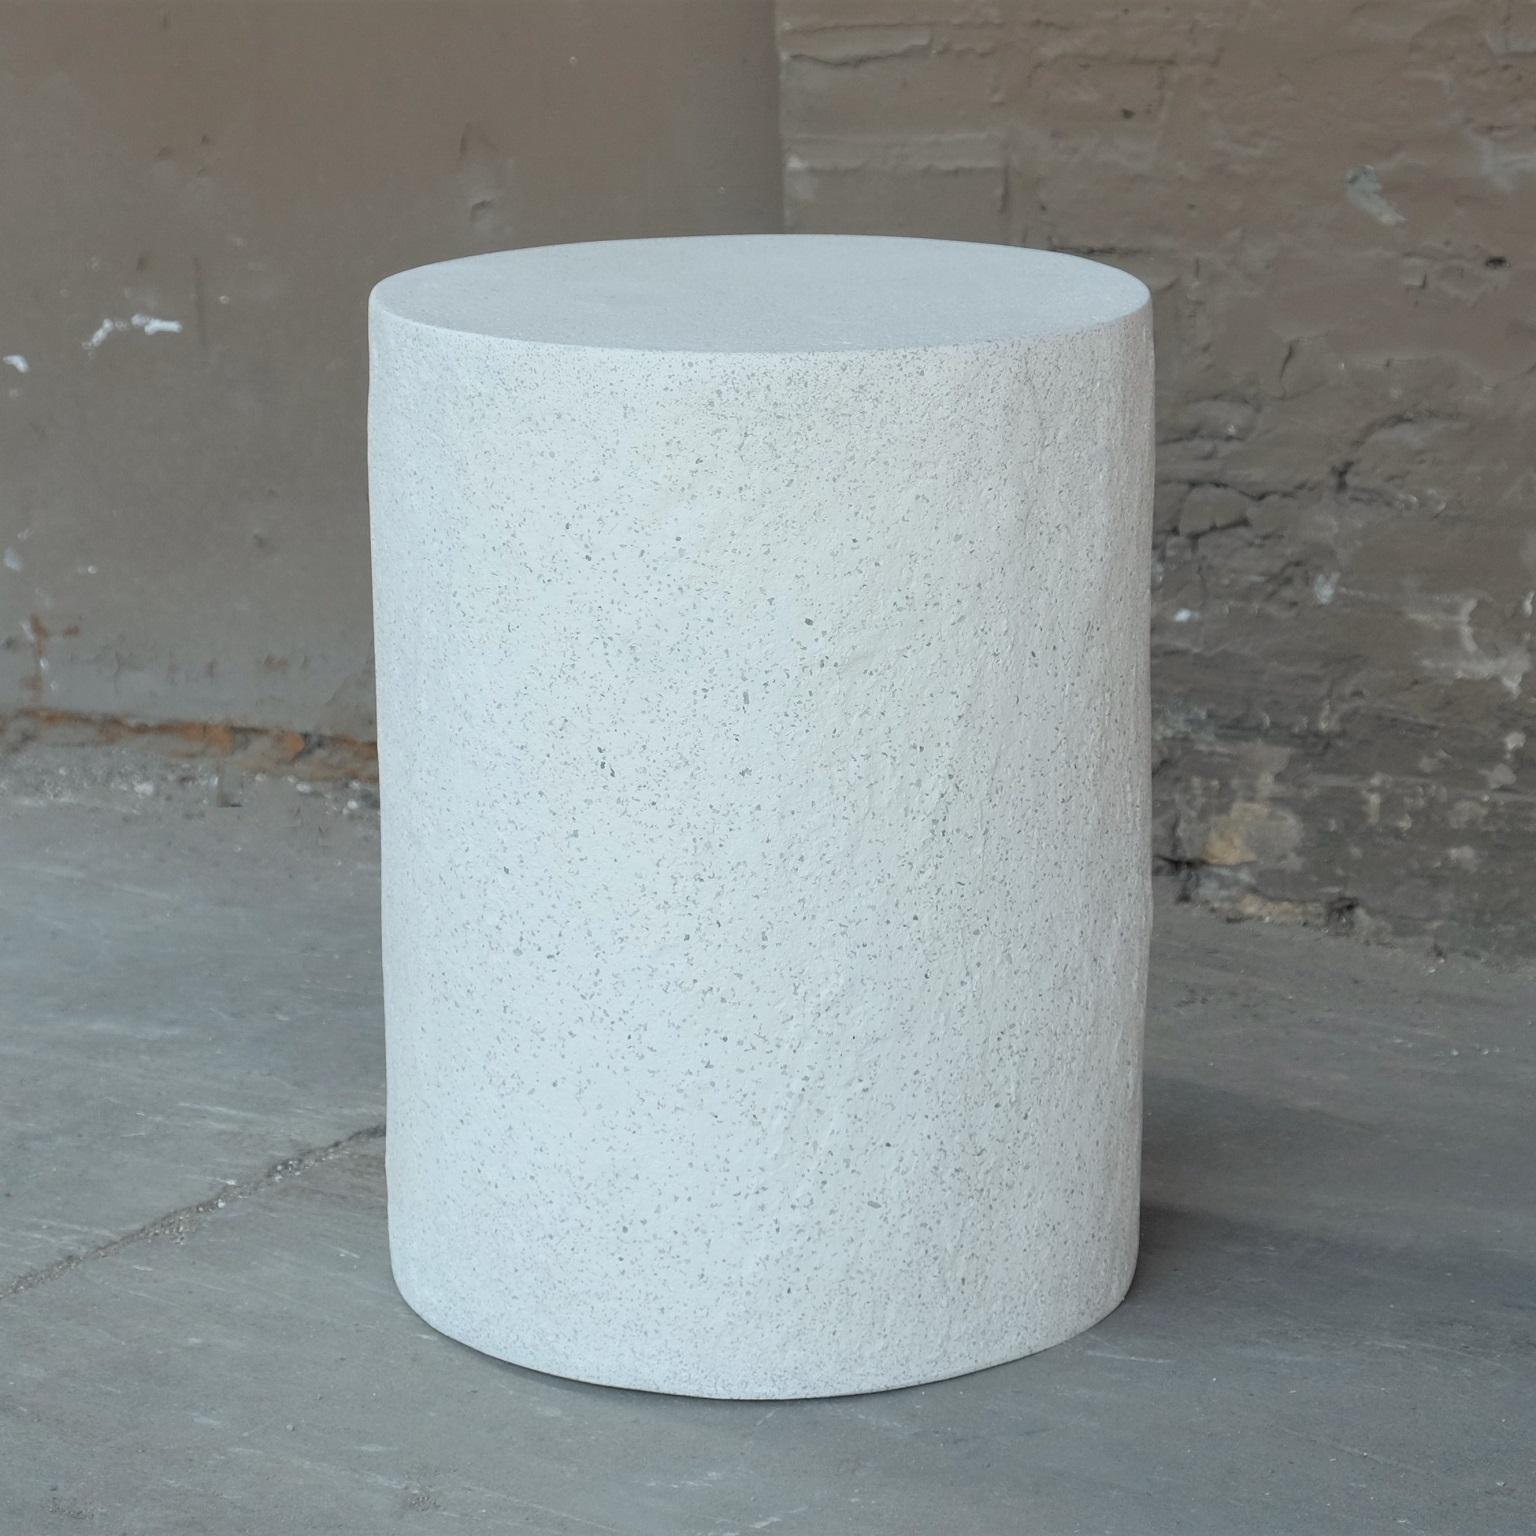 Minimalist Cast Resin 'Dock' Stool and Side Table, White Stone Finish by Zachary A. Design For Sale